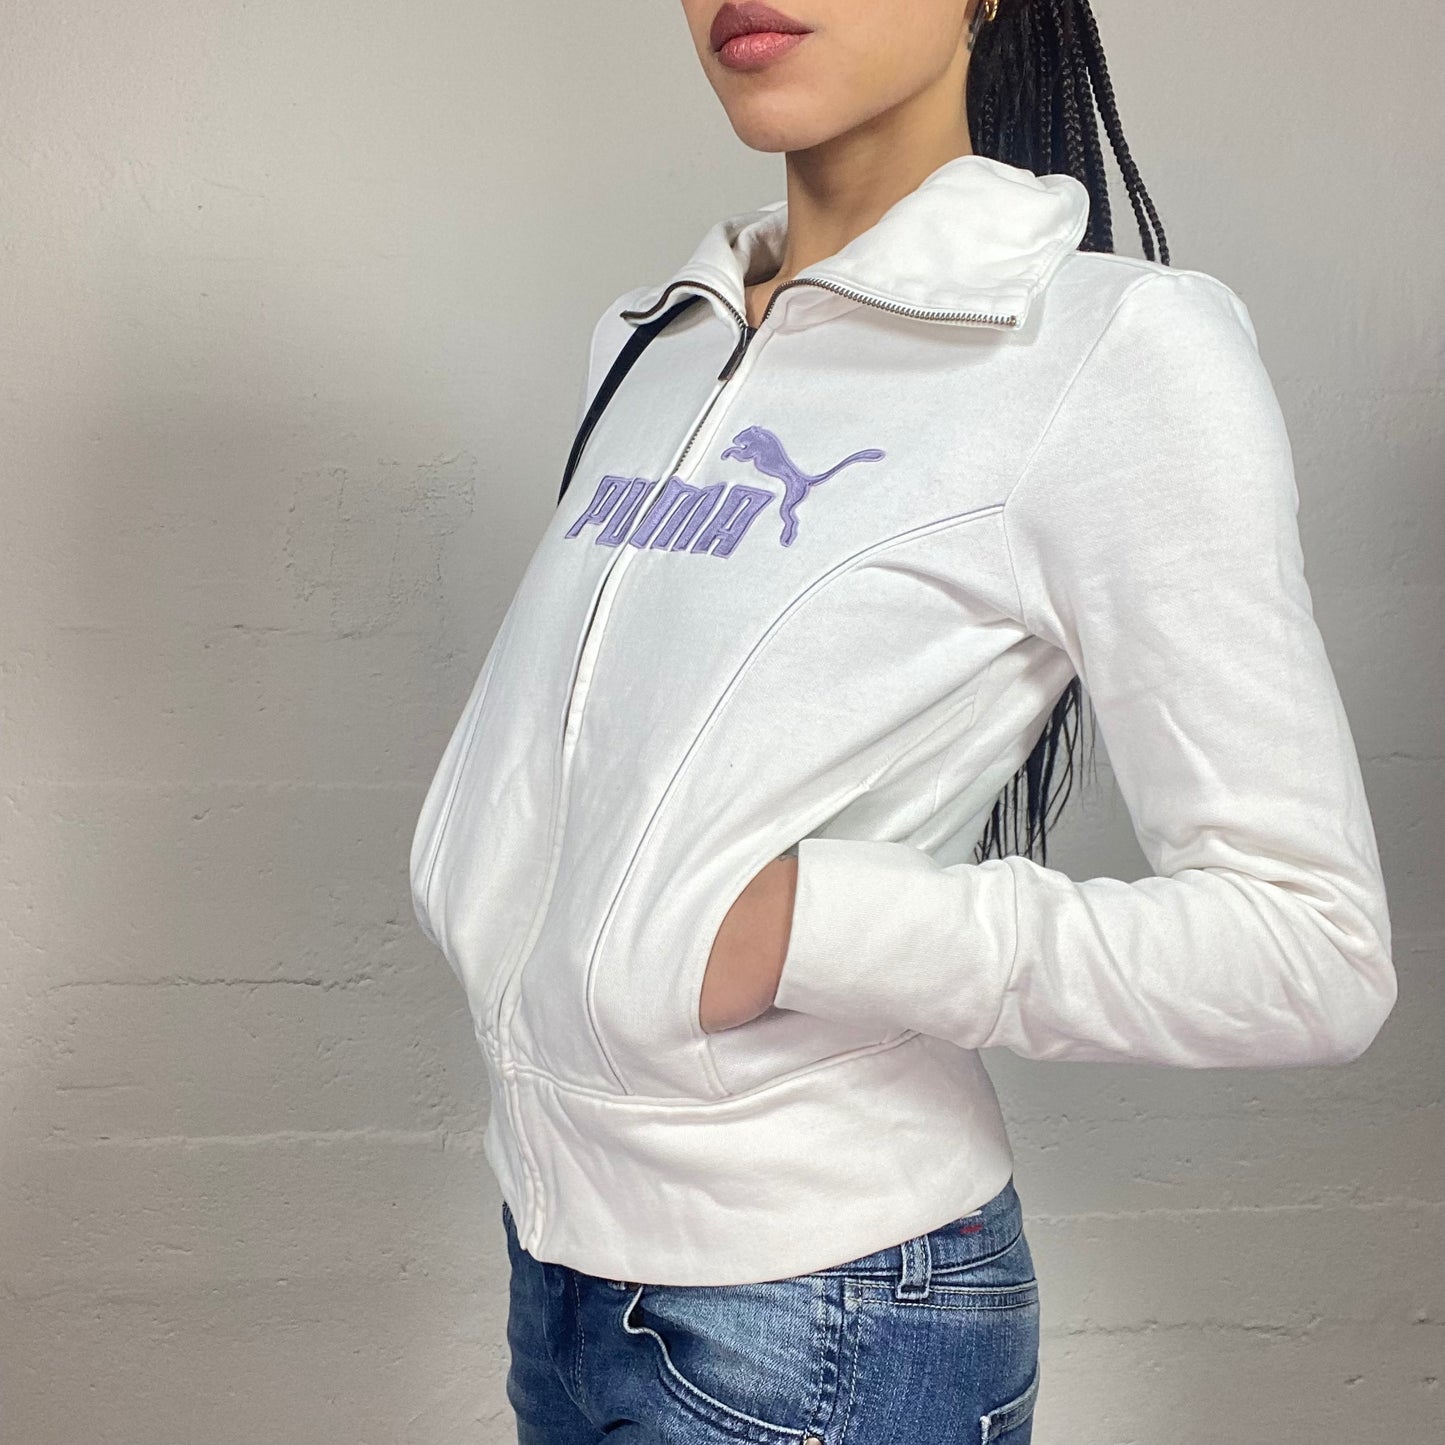 Vintage 2000's Puma College Girl White Zip-Up Hoodie with Brand Name Detail (S)